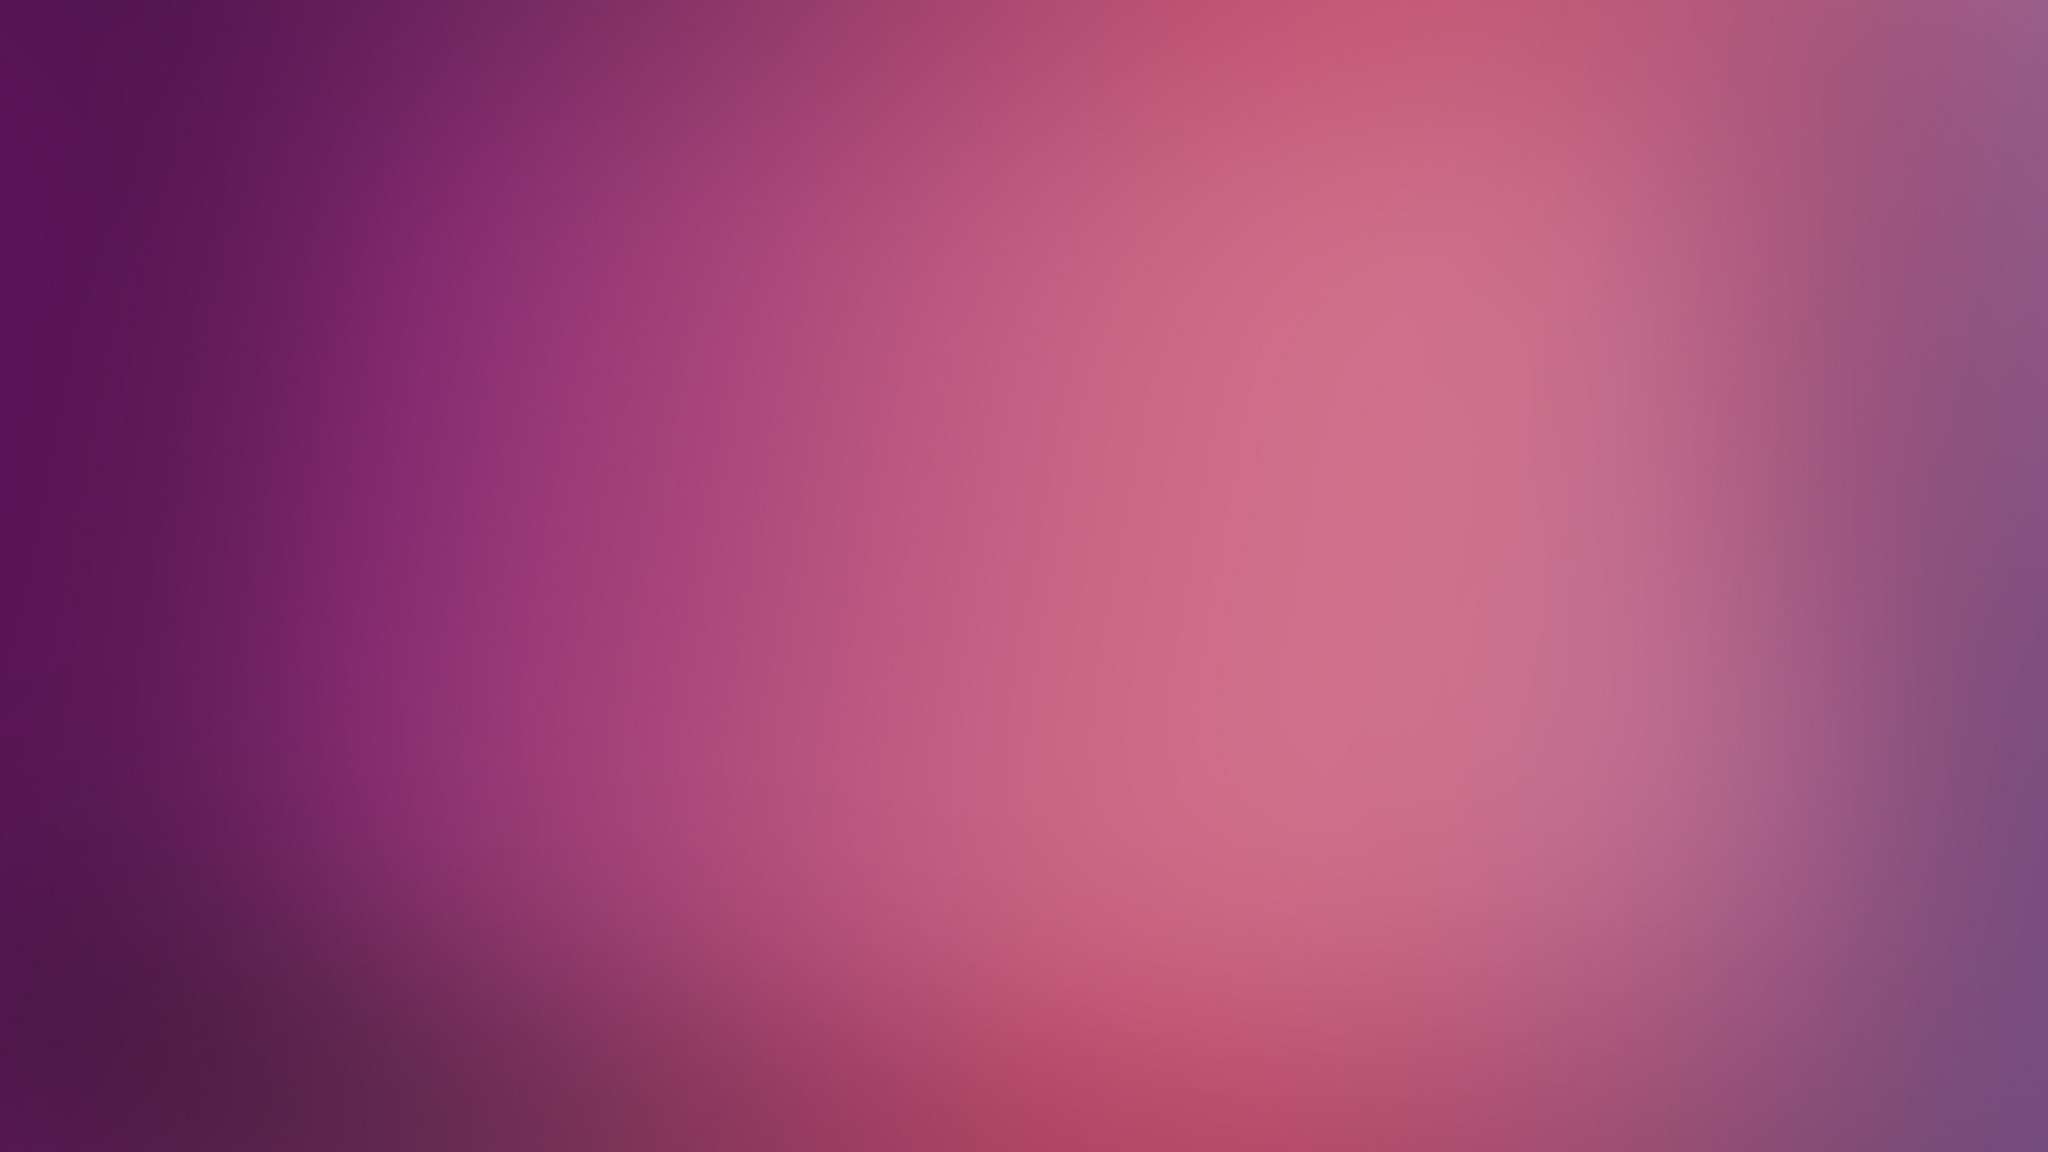 Solid color 1080P 2K 4K 5K HD wallpapers free download  Wallpaper Flare